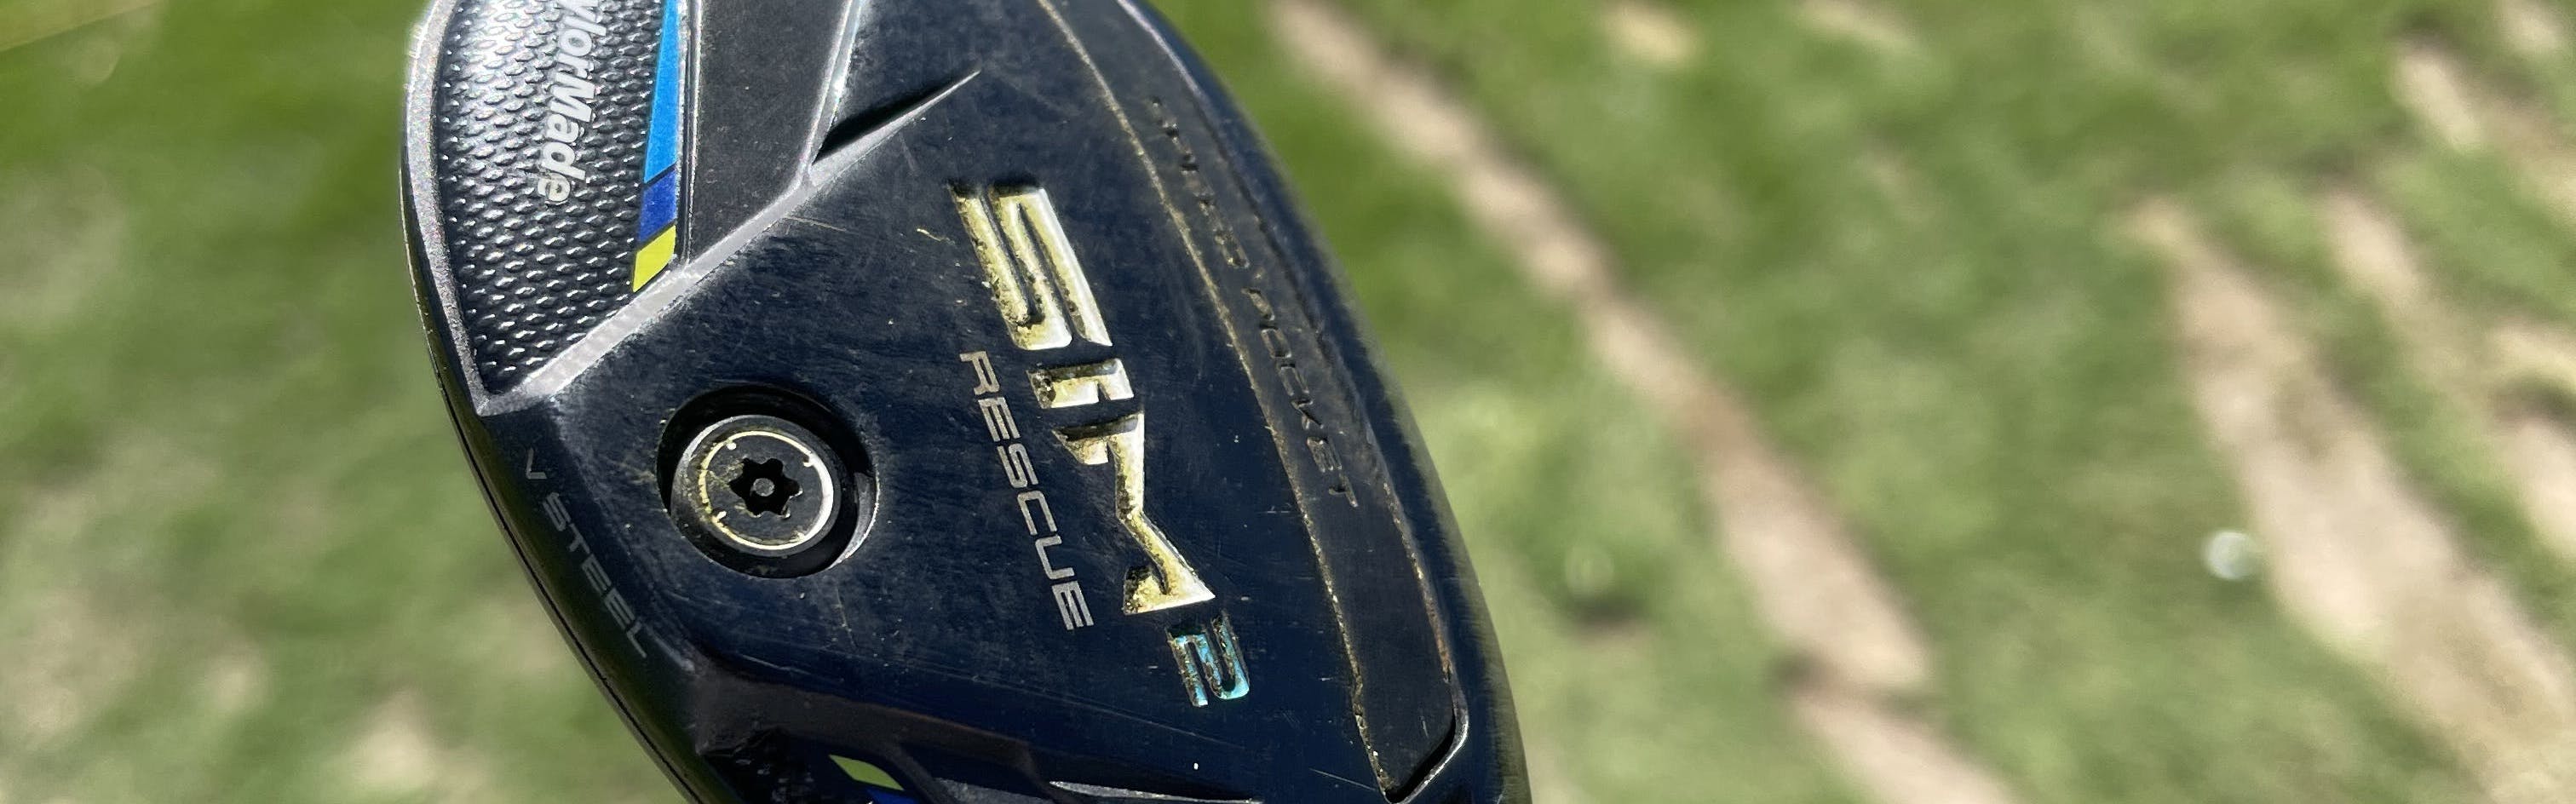 Expert Review: TaylorMade SIM2 Rescue | Curated.com